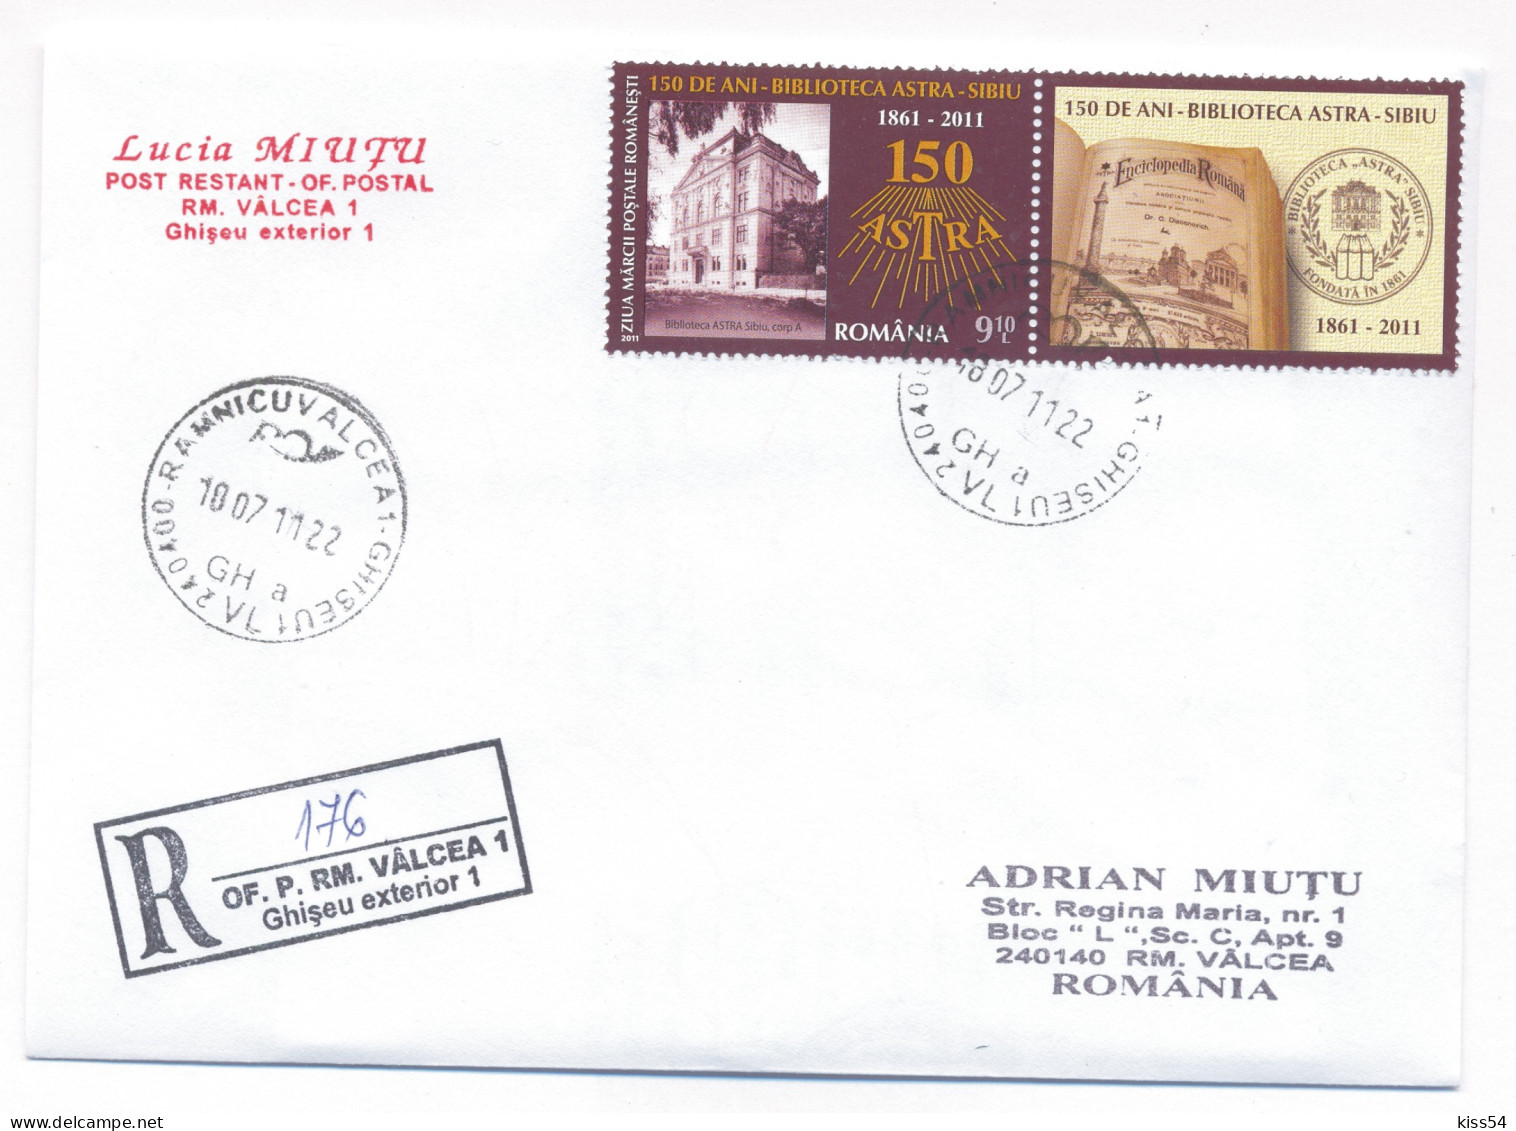 CP 16 - 176-a ASTRA LIBRARY, Sibiu, Romania, 150 Years - Registered, Stamp With Vignette - 2011 - Brieven En Documenten